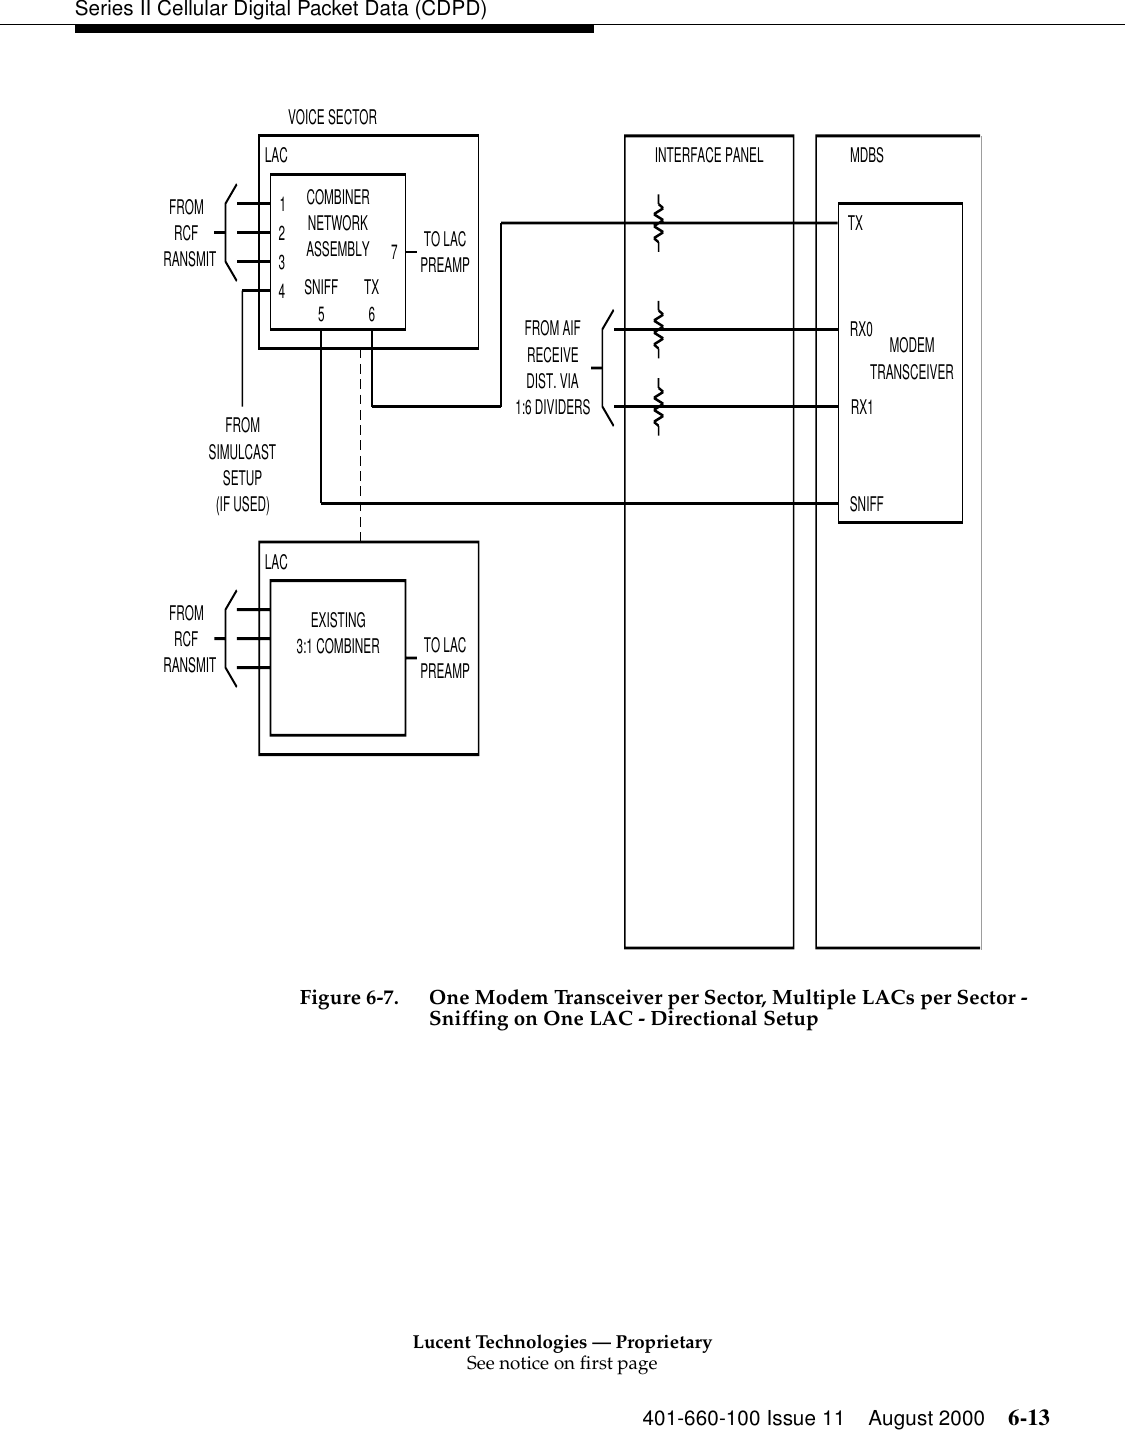 Lucent Technologies — ProprietarySee notice on first page401-660-100 Issue 11 August 2000 6-13Series II Cellular Digital Packet Data (CDPD)Figure 6-7. One Modem Transceiver per Sector, Multiple LACs per Sector -Sniffing on One LAC - Directional Setup VOICE SECTORLAC12347INTERFACE PANEL MDBSFROMRCFRANSMITCOMBINERNETWORKASSEMBLYSNIFF5TX6LACFROMRCFRANSMITTO LACPREAMPTO LACPREAMPFROM AIFRECEIVEDIST. VIA1:6 DIVIDERSFROMSIMULCASTSETUP(IF USED)EXISTING3:1 COMBINERTXRX0RX1SNIFFMODEMTRANSCEIVER